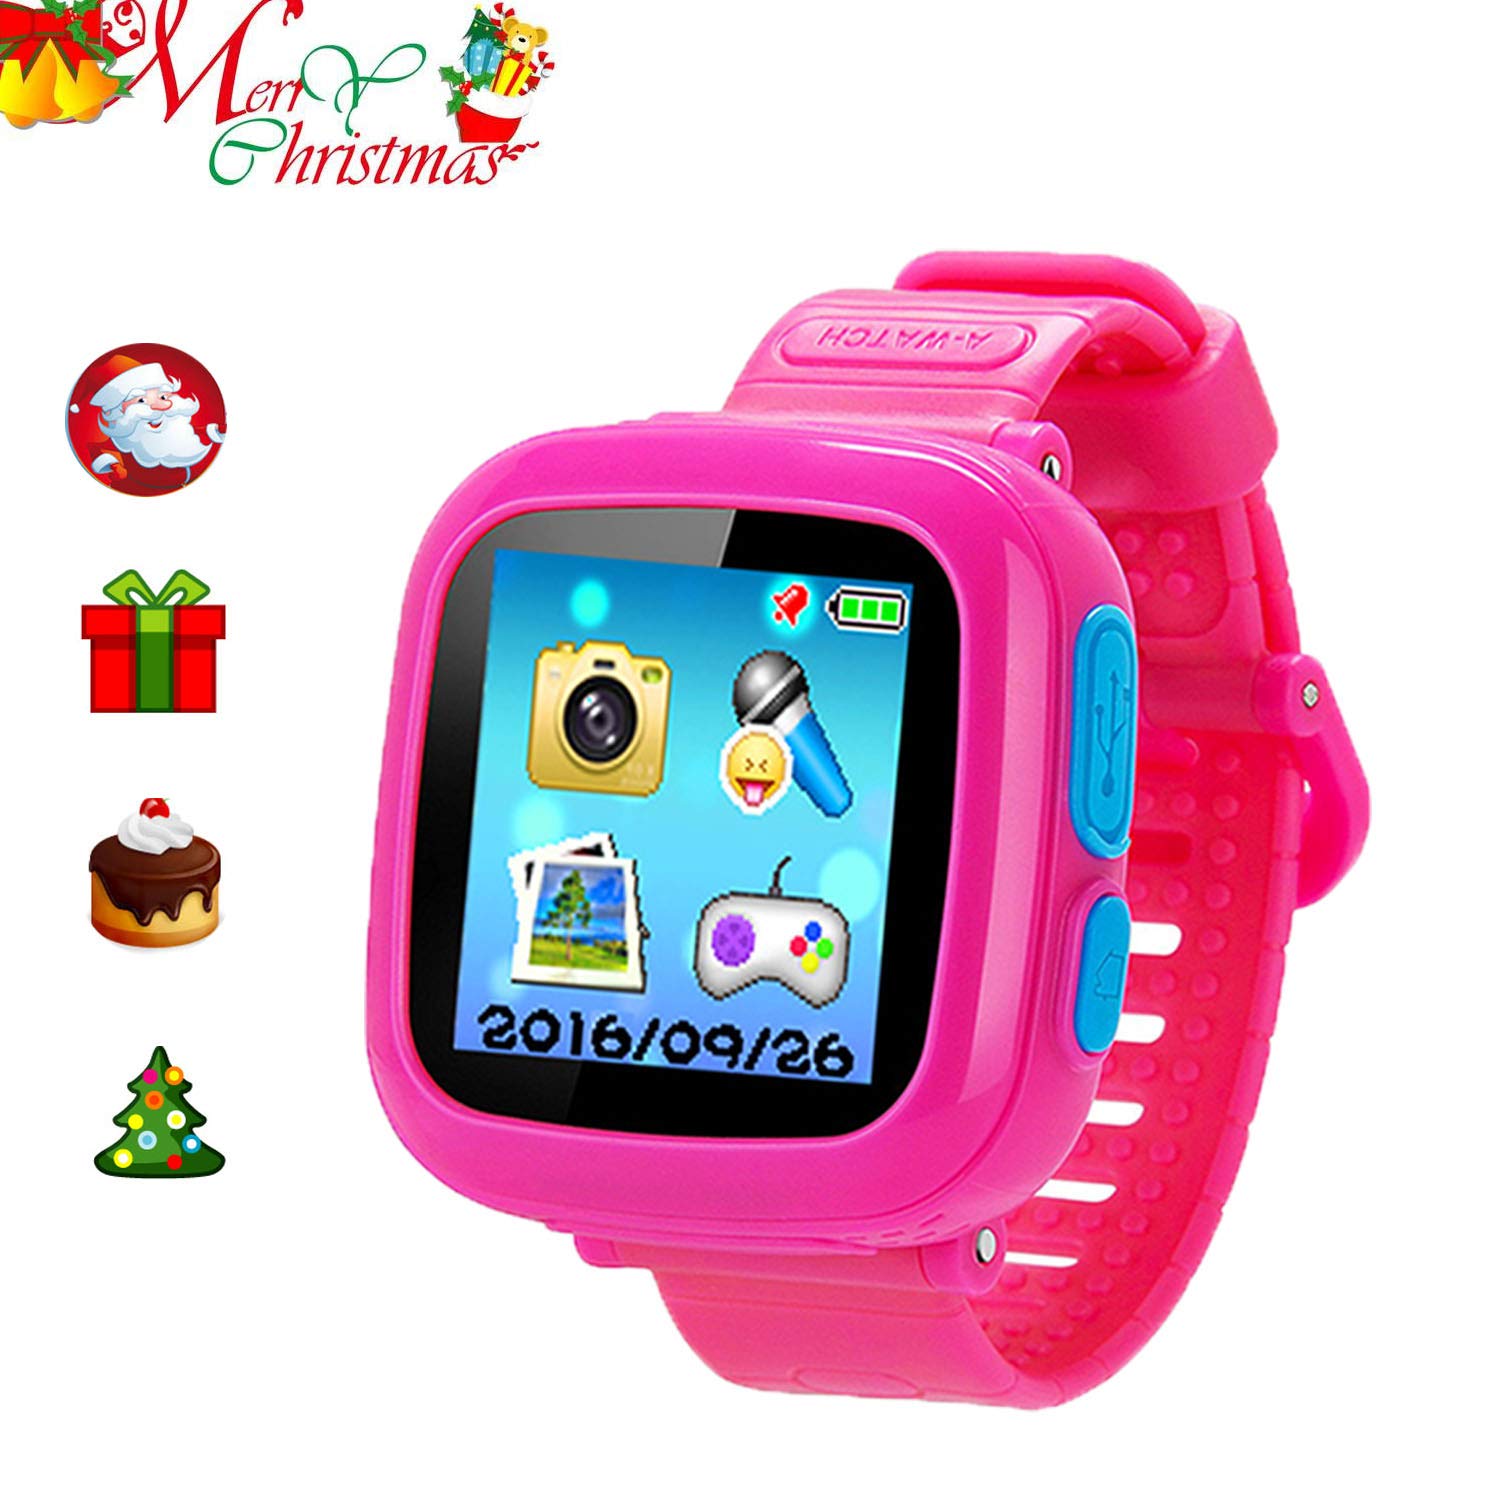 ZOPPRI Kids Game Watch Smart Watch for Kids with 1.5 “ Touch Screen